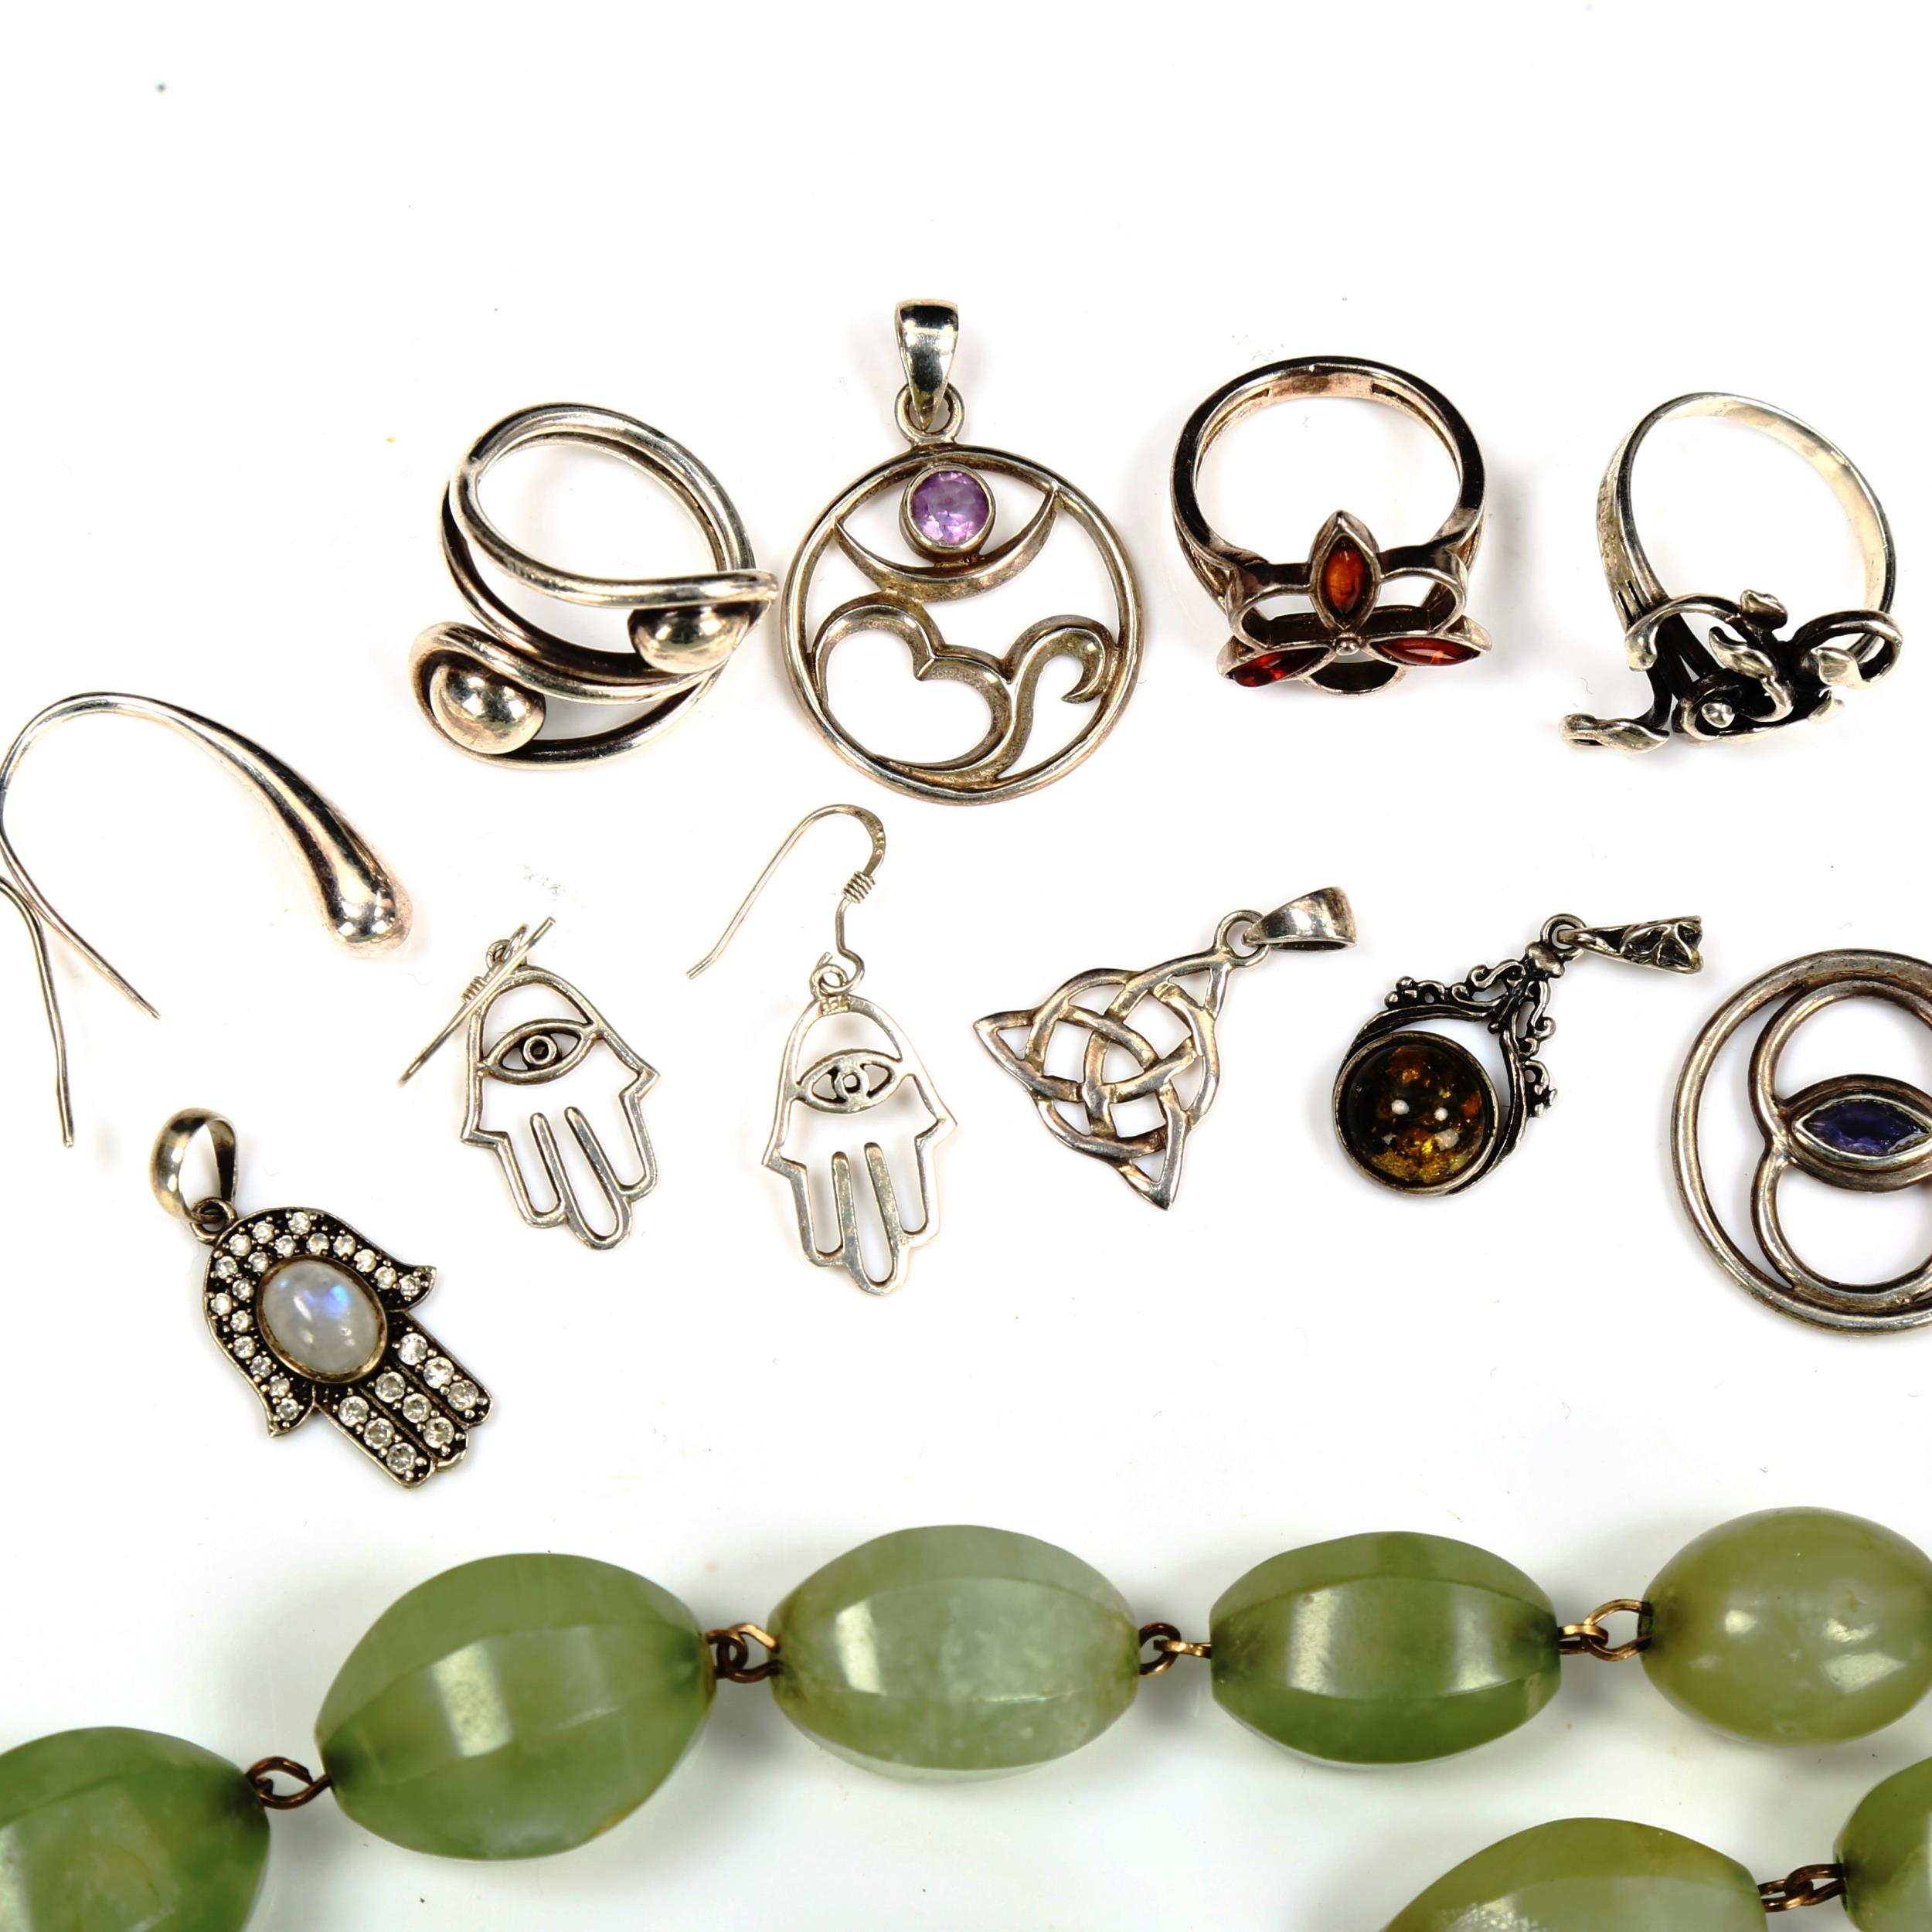 Various silver jewellery and a green hardstone necklace Lot sold as seen unless specific item(s) - Image 2 of 4